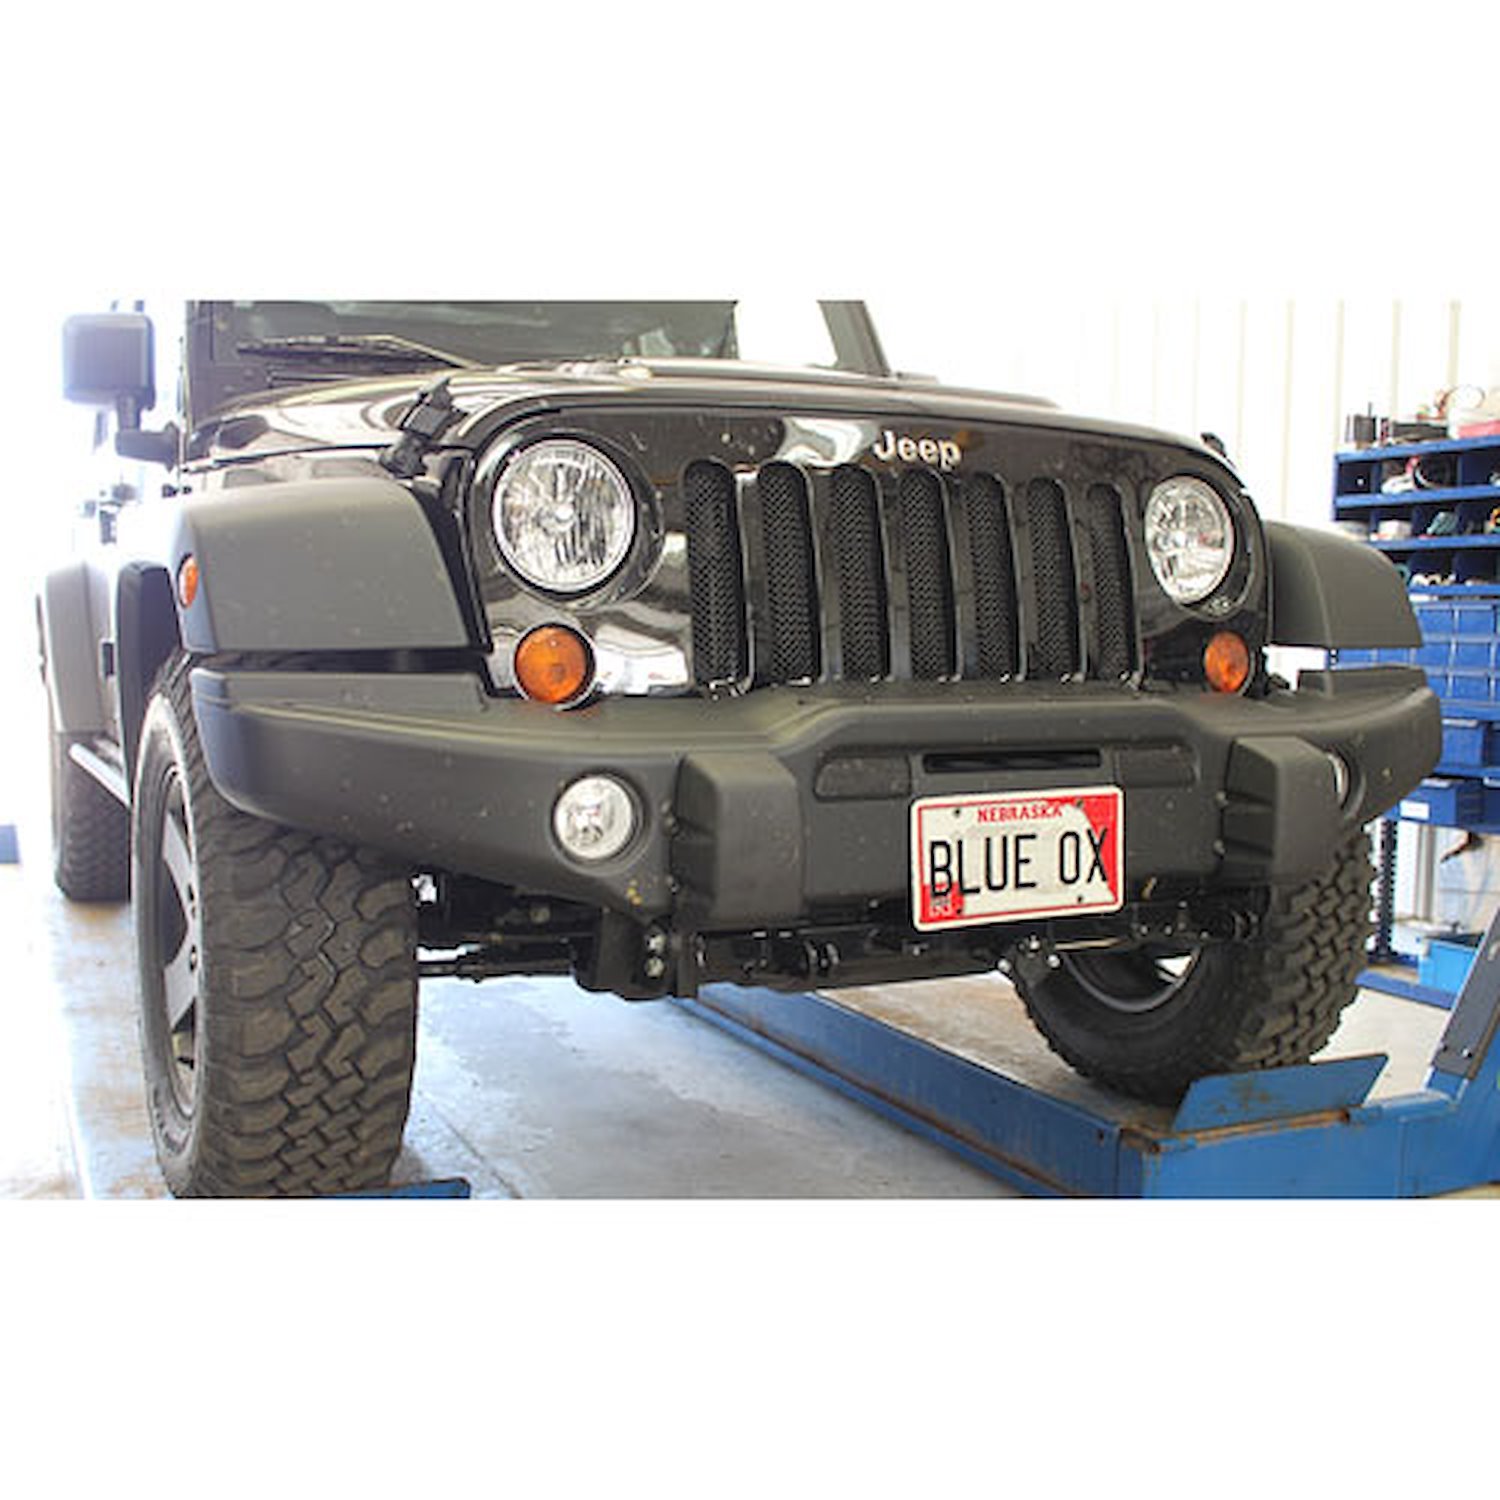 Tow Bar Baseplate 2012 Jeep Wrangler Unlimited "Call of Duty" Edition